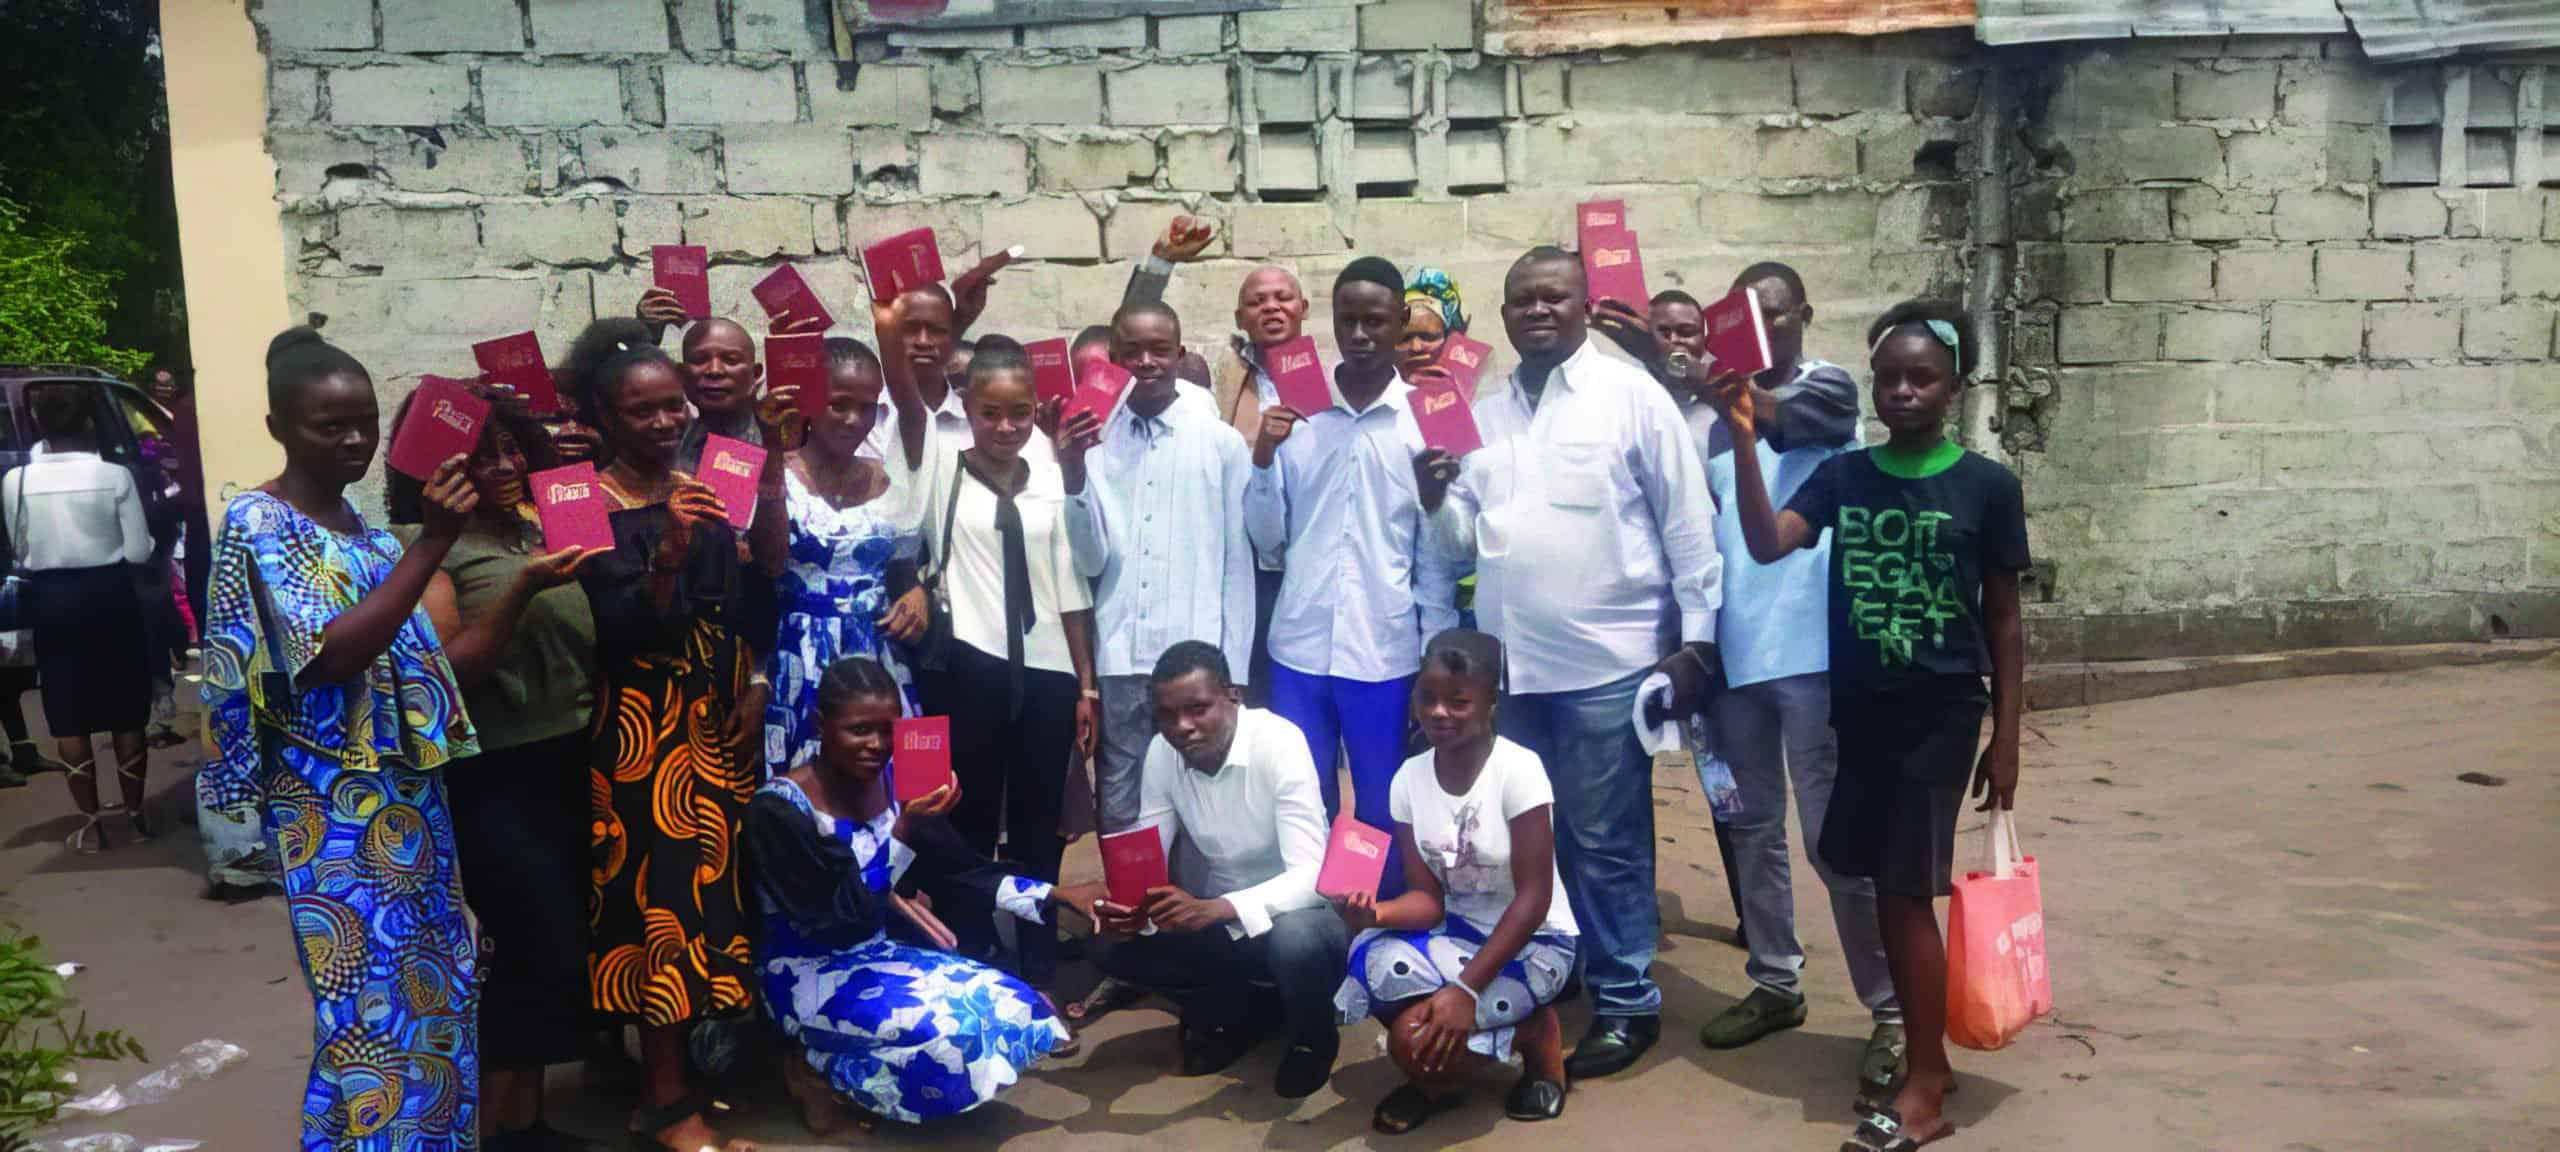 A group of new believer each with their new Bible raised in the air having just received them standing outside infront of a building